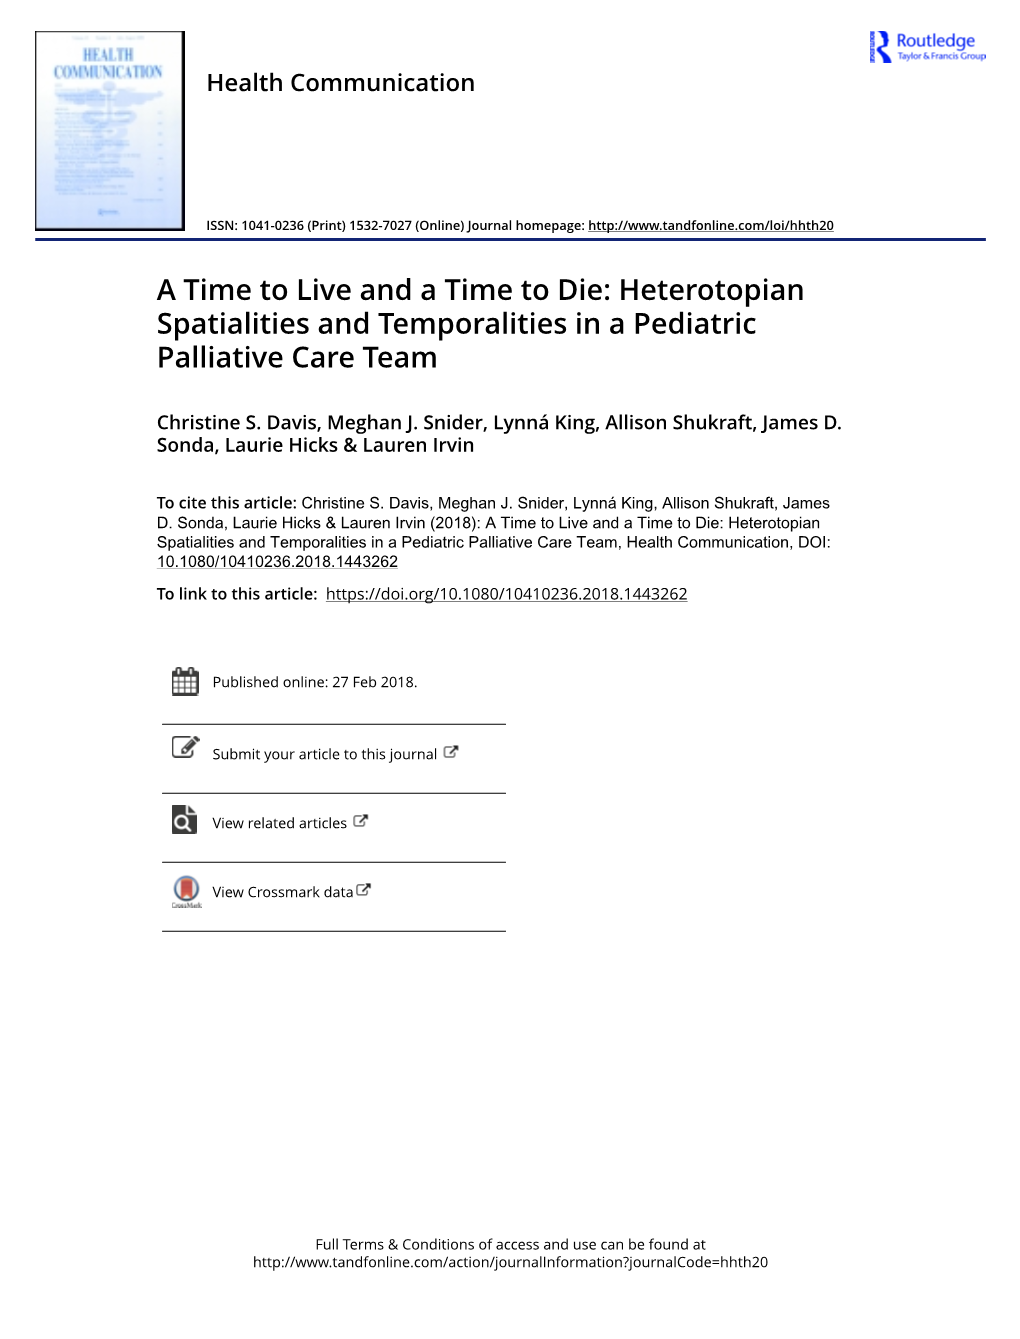 A Time to Live and a Time to Die: Heterotopian Spatialities and Temporalities in a Pediatric Palliative Care Team